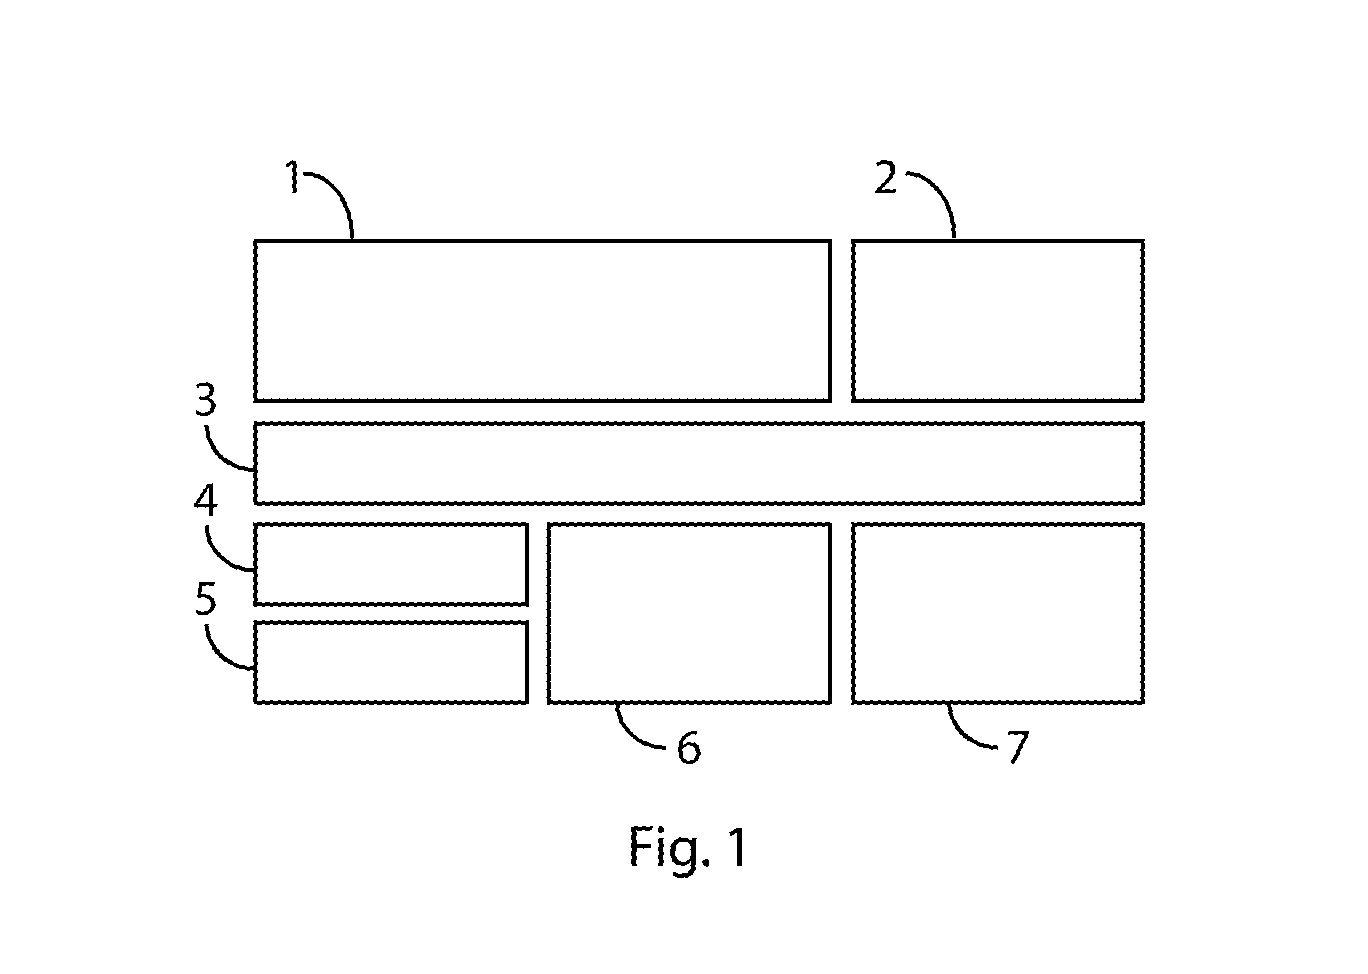 Method and system of caching web content in a hard disk